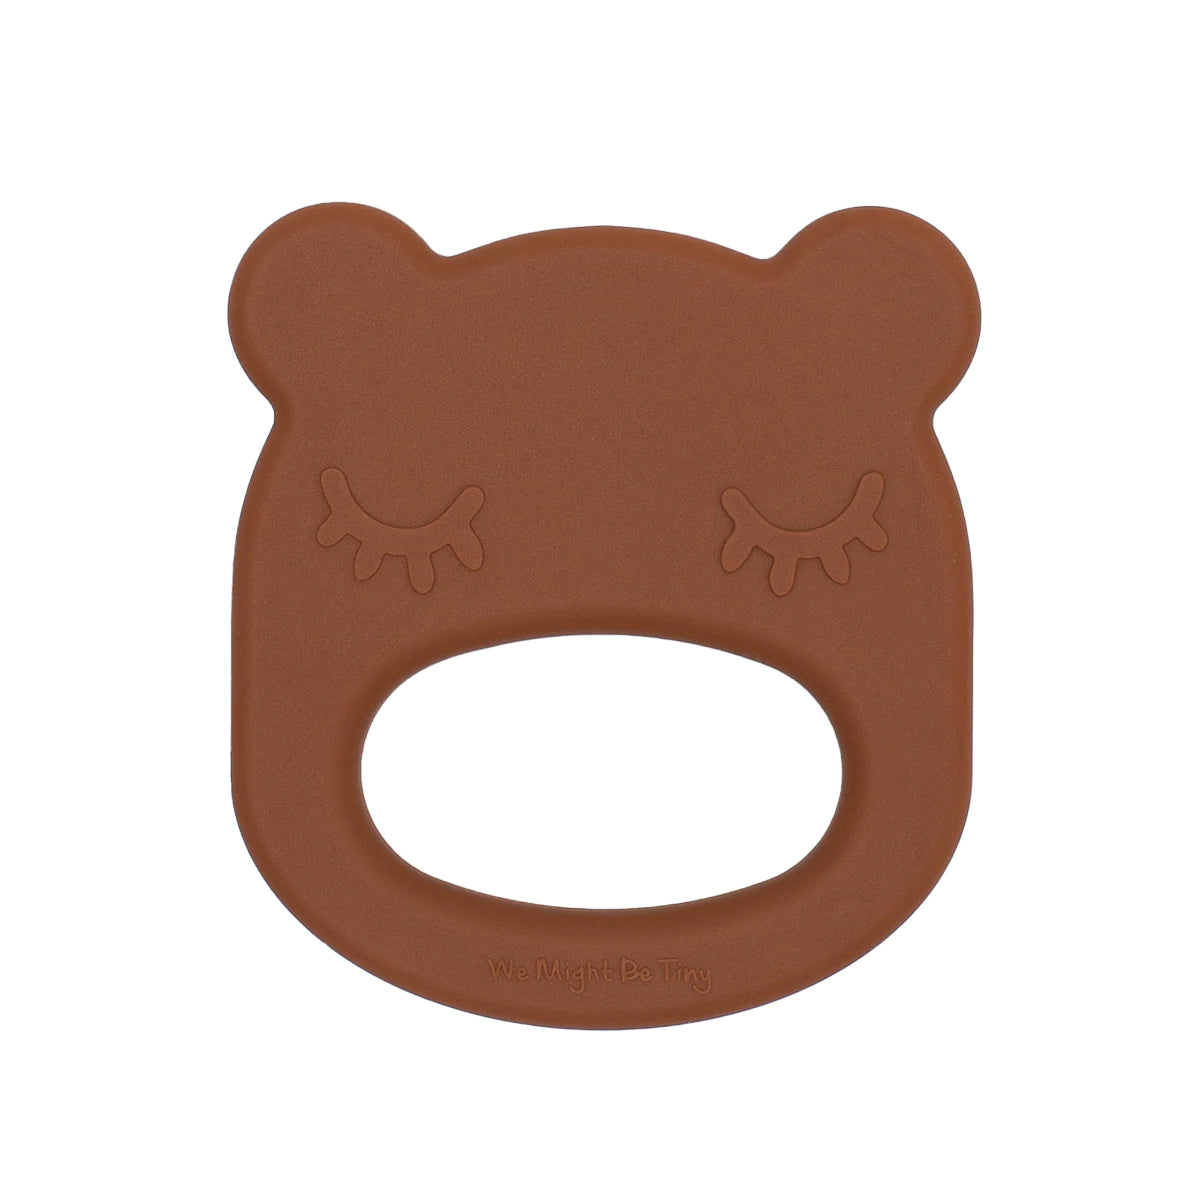 We Might Be Tiny | Silicone Teether - Bear